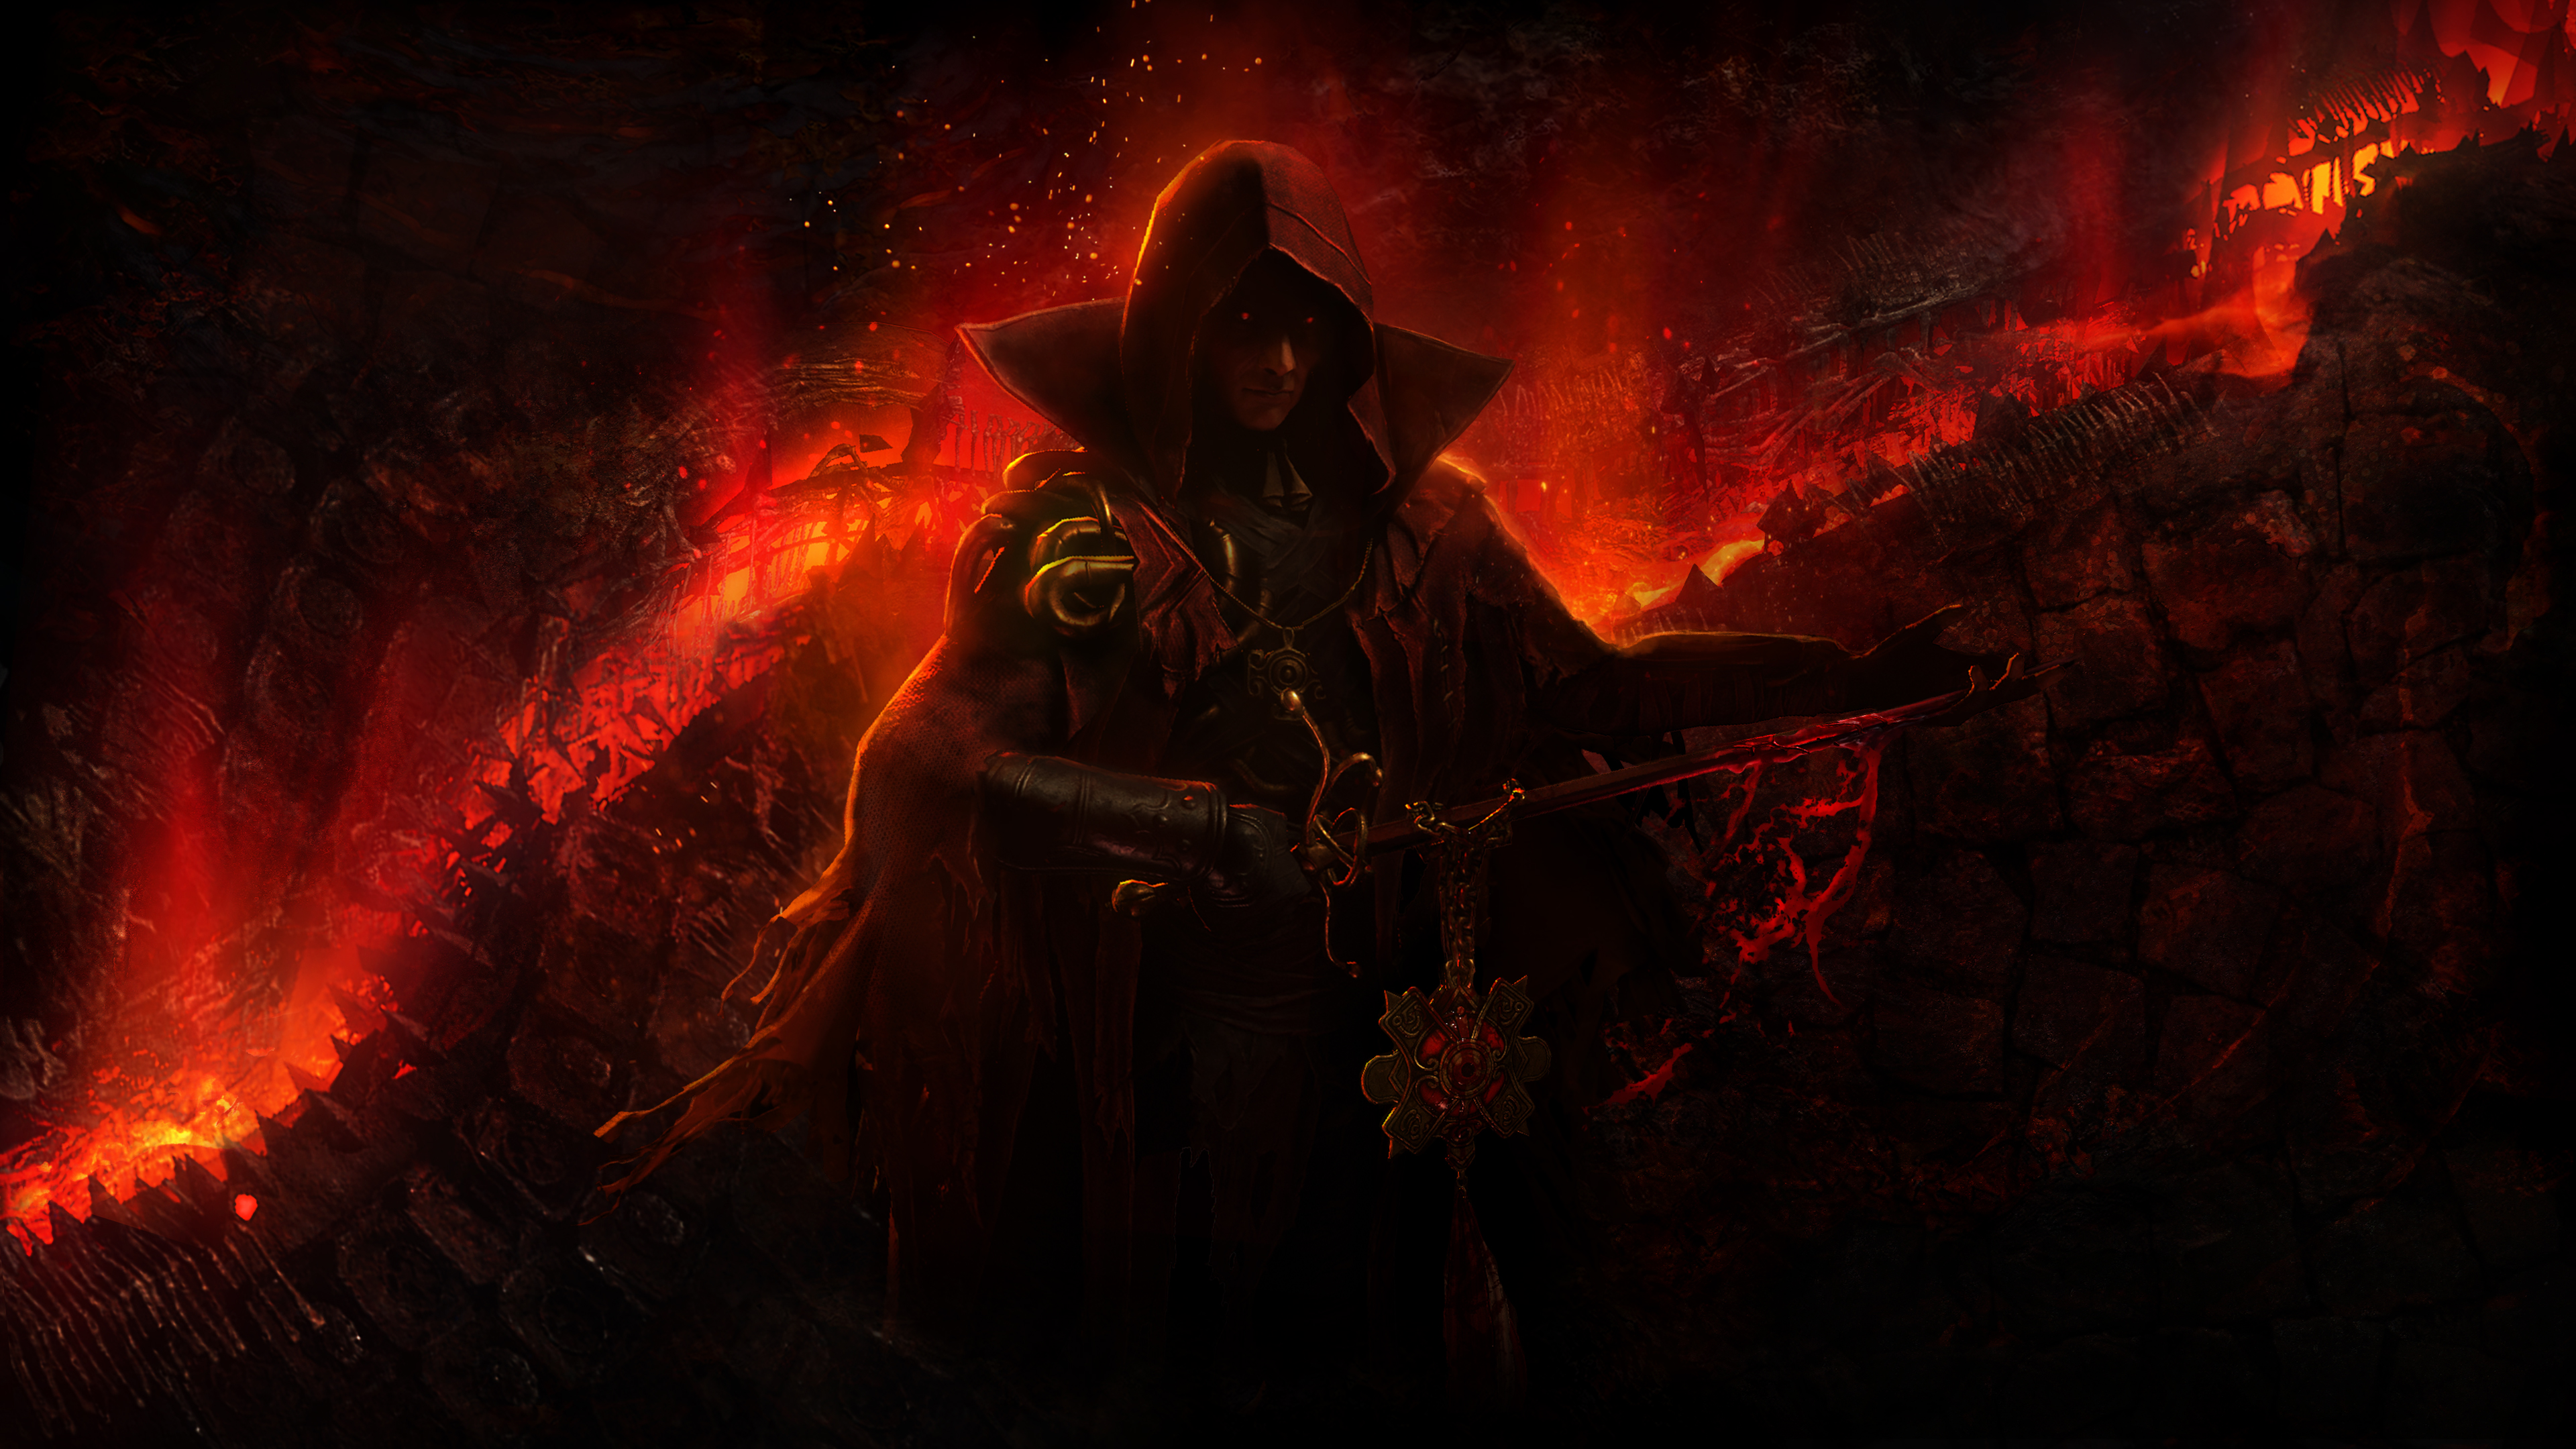  Path of Exile's Scourge expansion pits you against an invading army of demons 